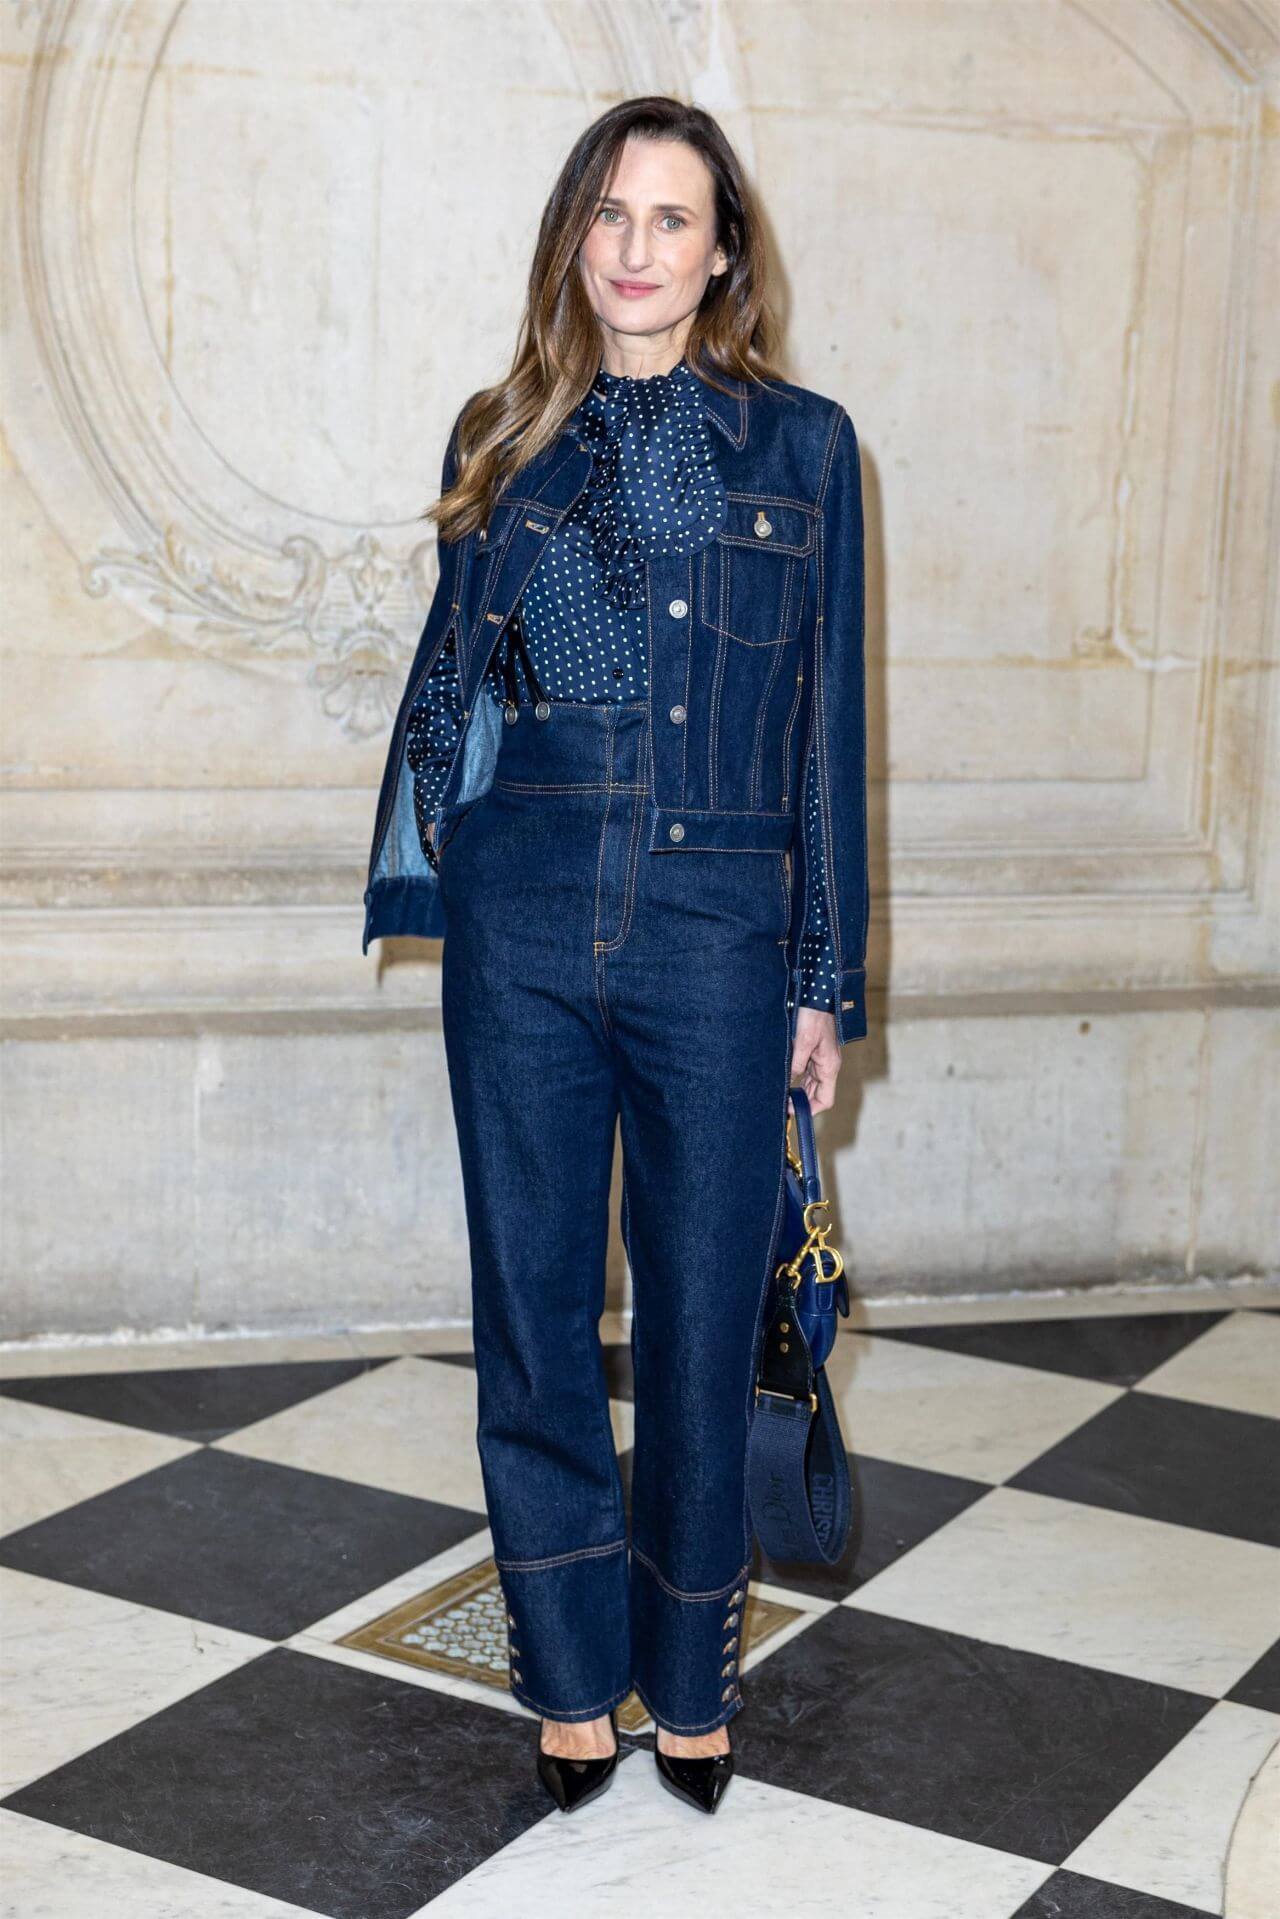 Camille Cottin  In Blue Denim Jacket & Pants Under A Top  At Christian Dior Haute Couture Show In Paris Fashion Week